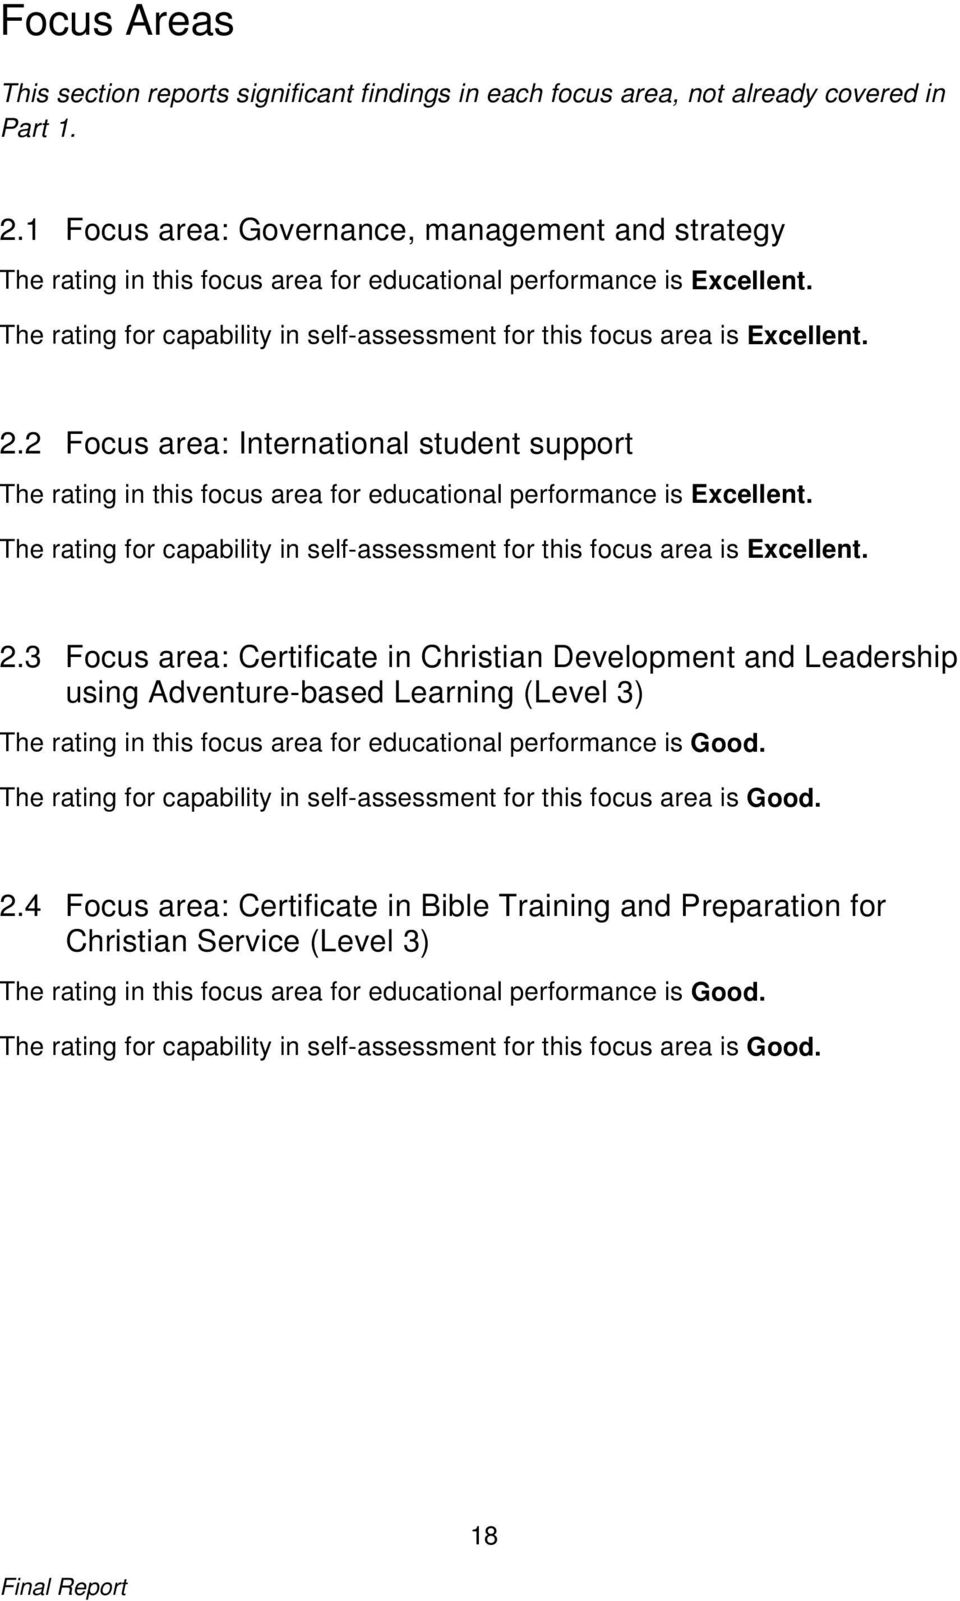 2.2 Focus area: International student support The rating in this focus area for educational performance is Excellent. The rating for capability in self-assessment for this focus area is Excellent. 2.